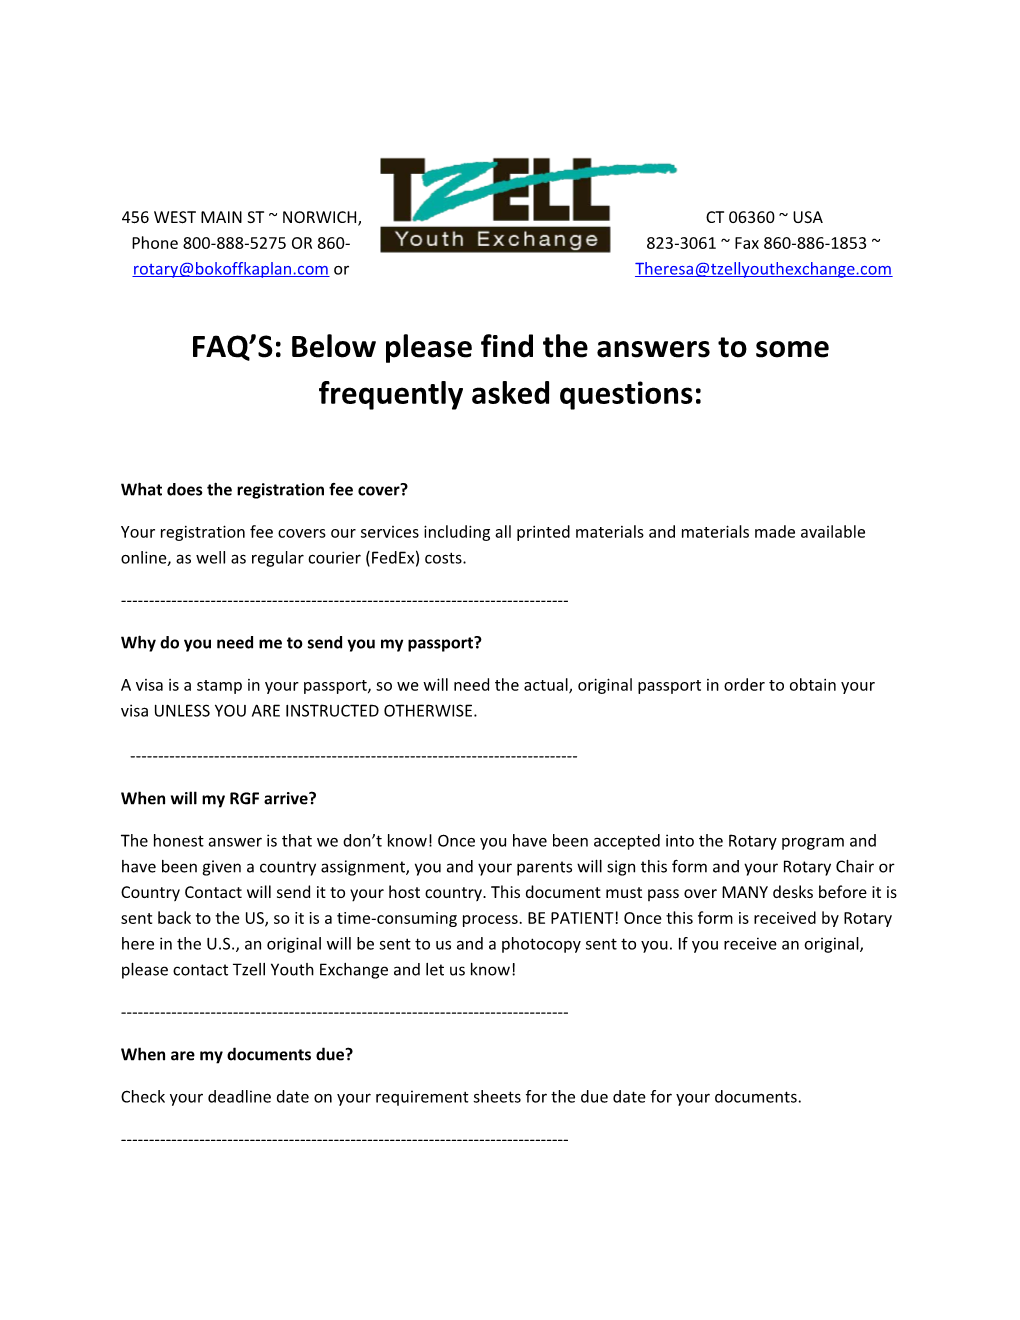 FAQ S: Below Please Find the Answers to Some Frequently Asked Questions